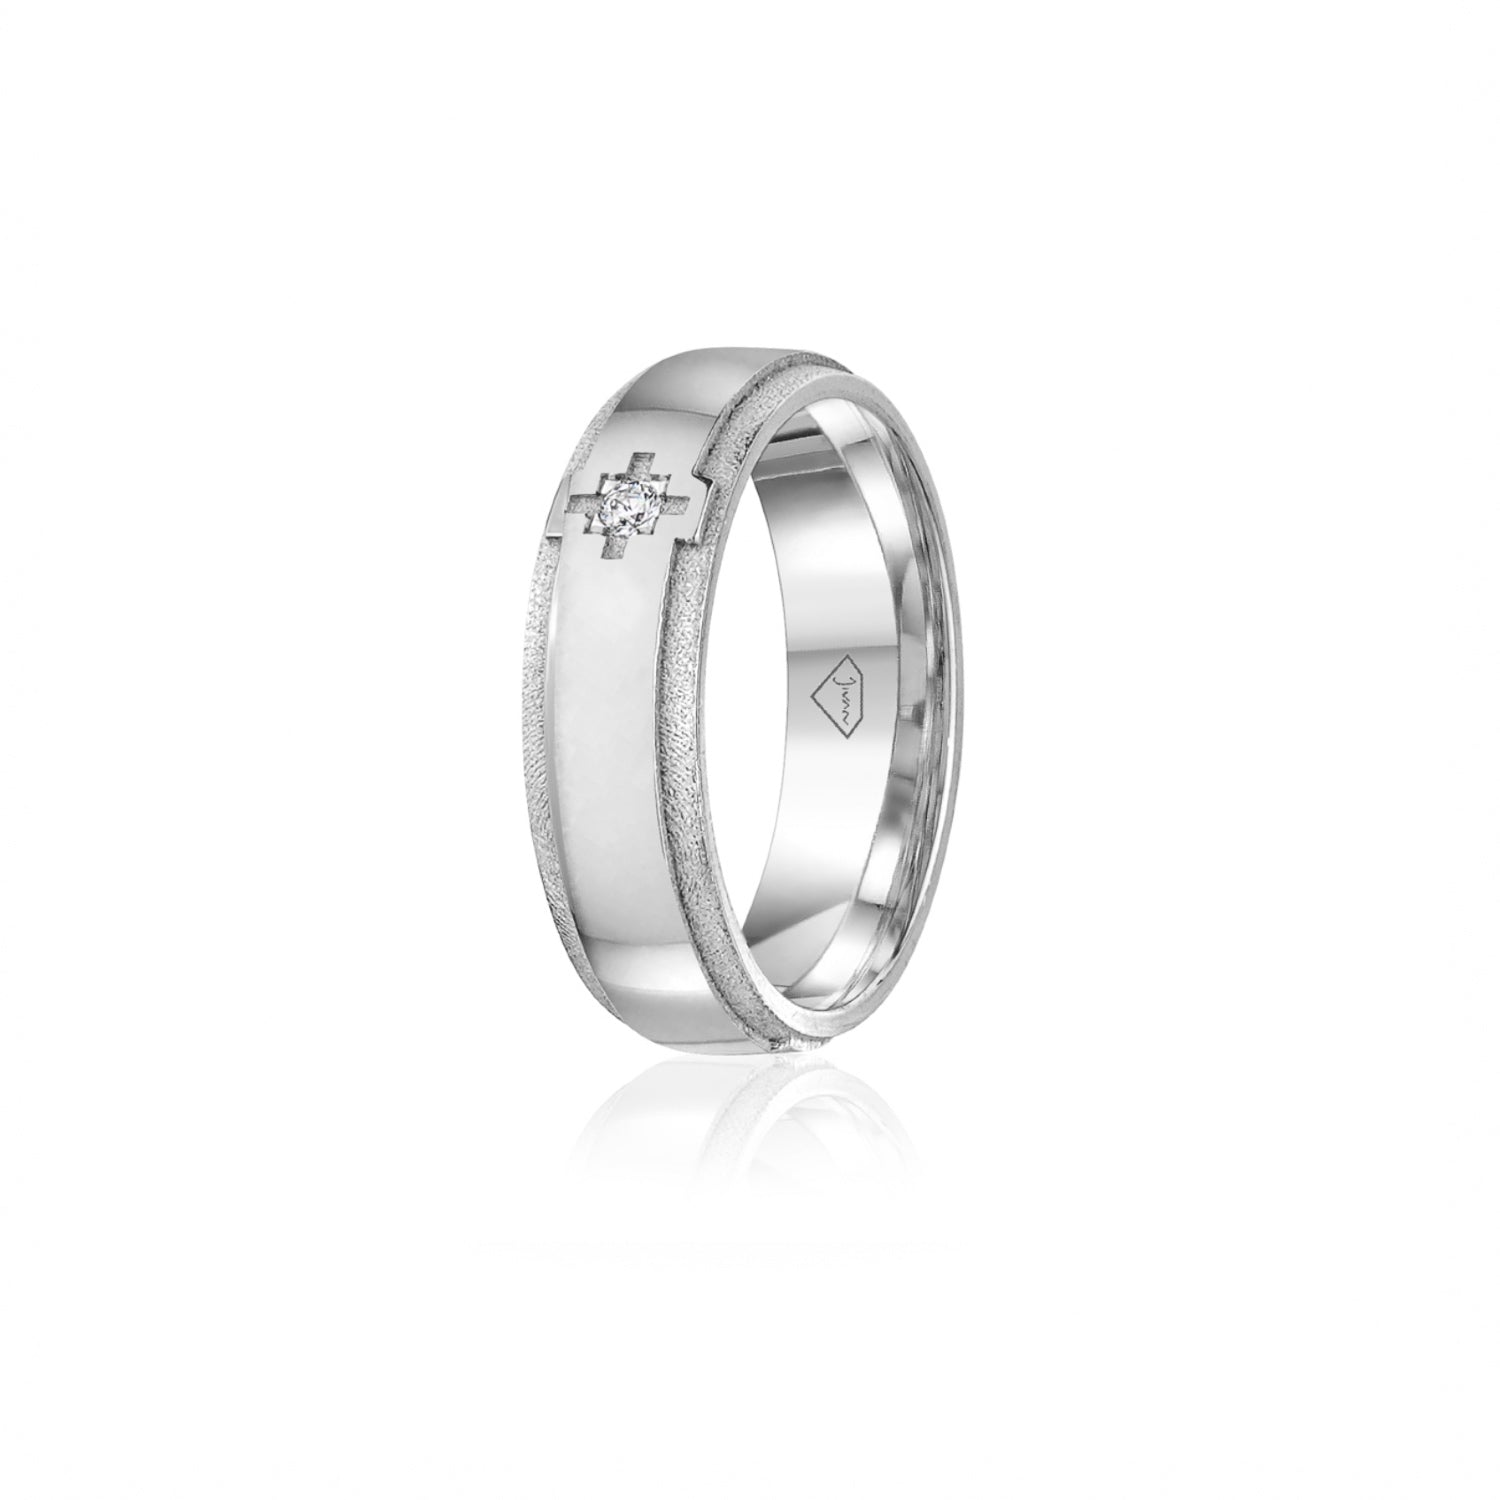 Diamond Accent Polished Finish Bevelled Edge 8-9 mm Wedding Ring in White Gold